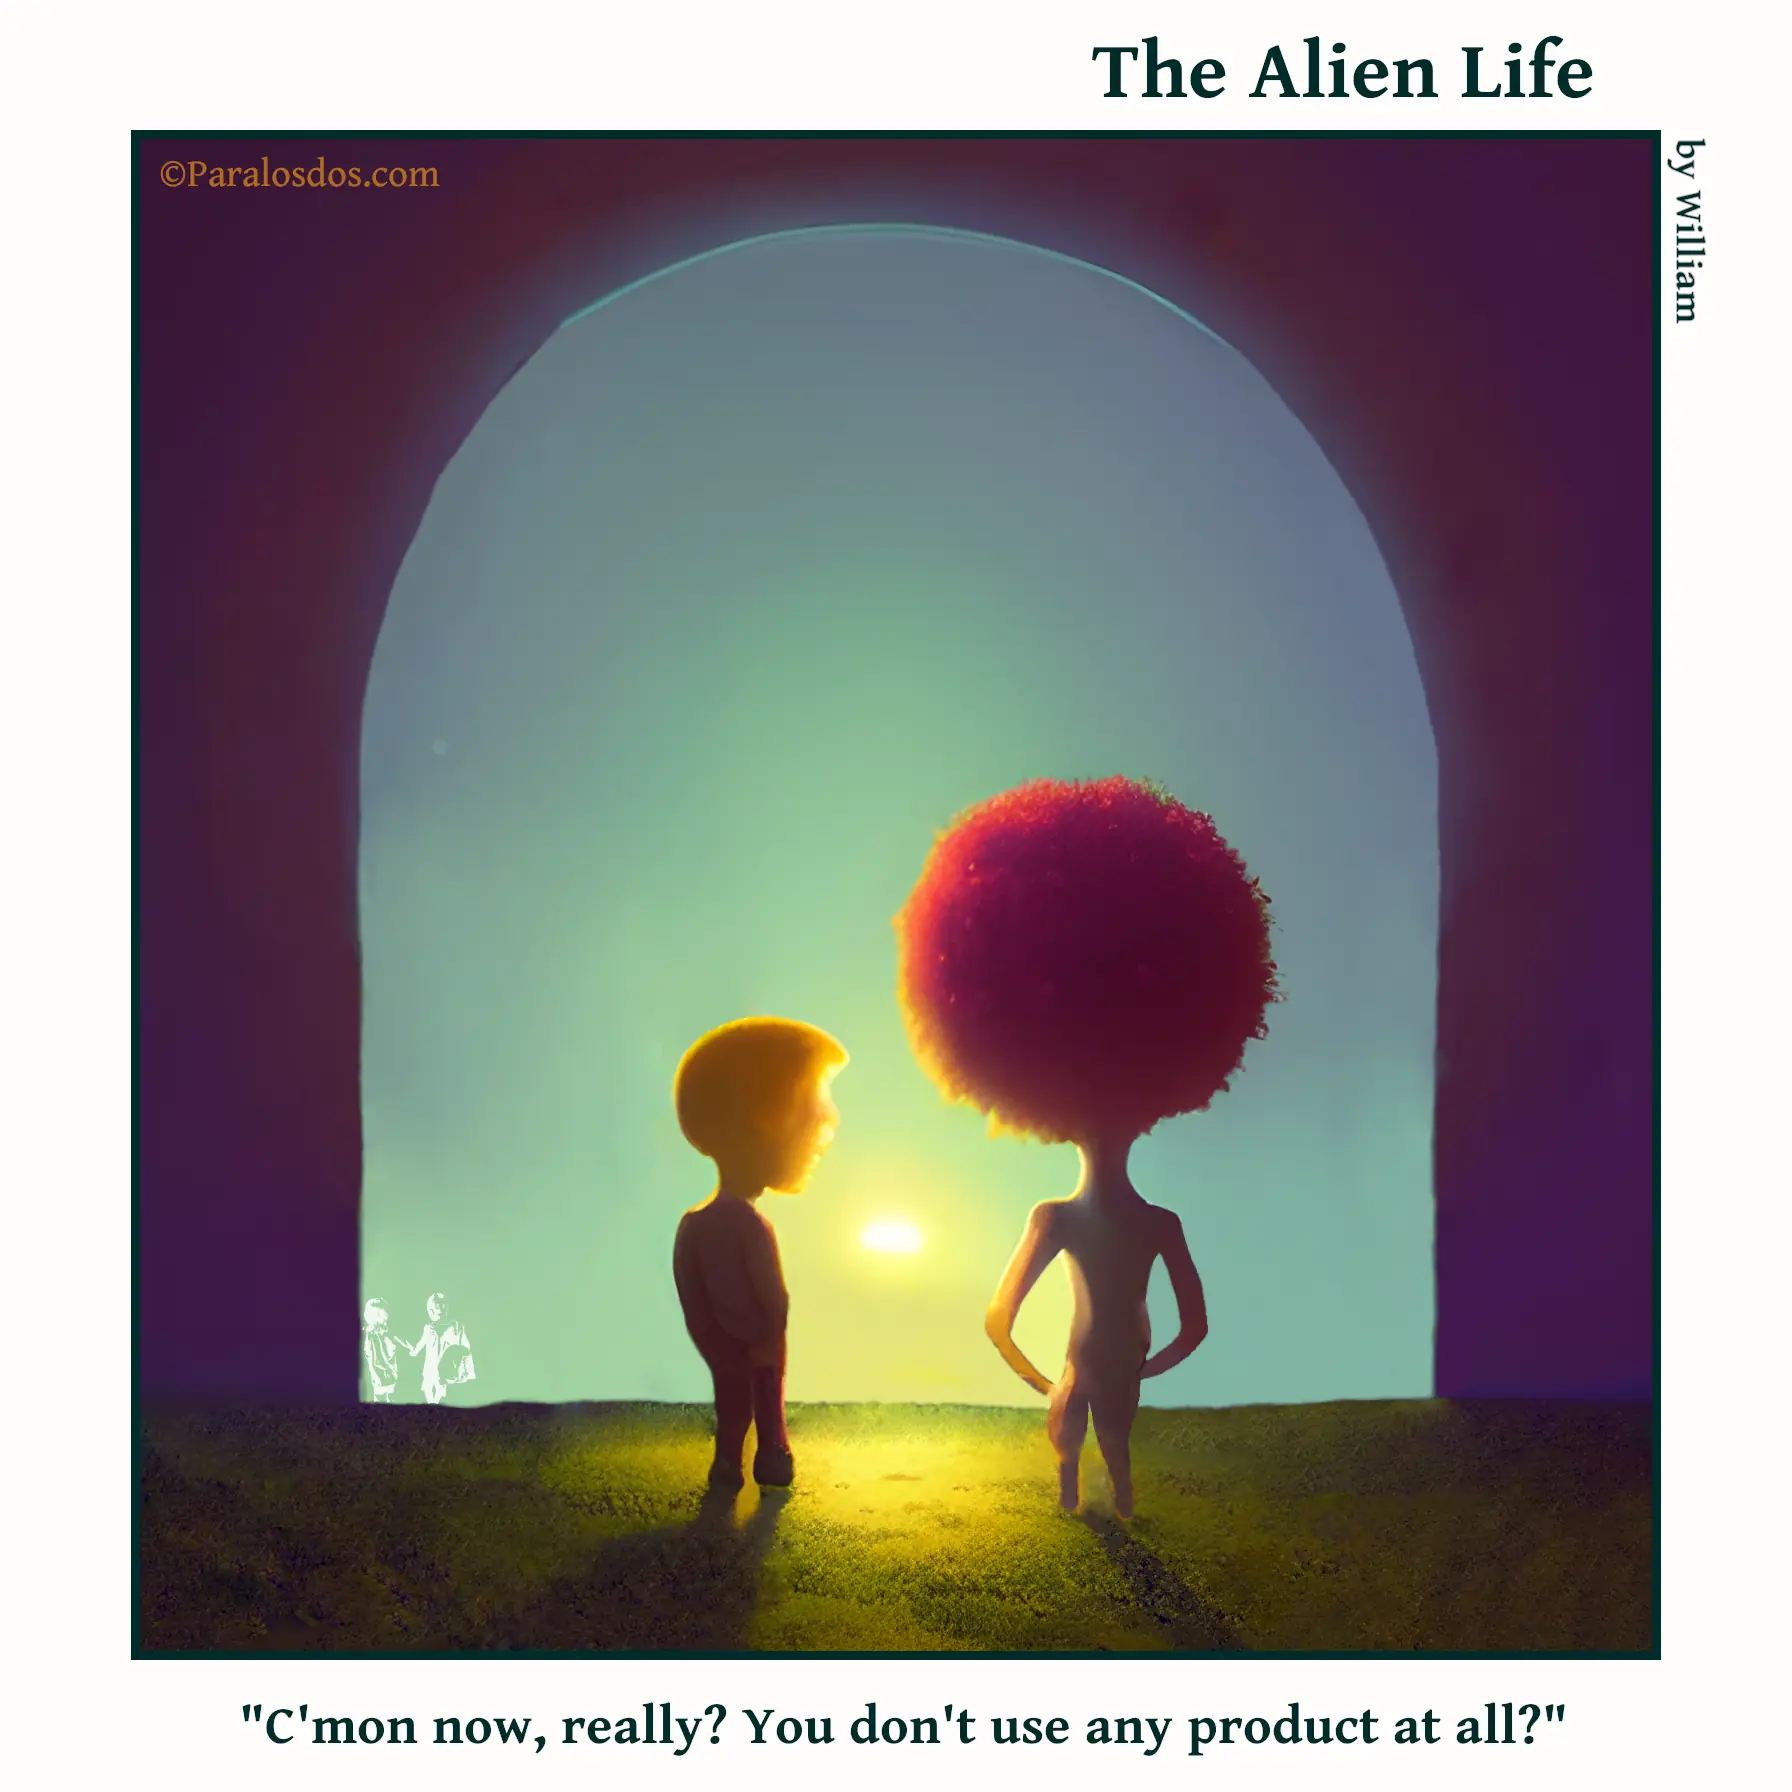 The Alien Life, one panel Comic. Two aliens are standing together in front of an open portal to the sky. One of them has a huge, magnificent red and orange afro. The caption reads: "C'mon now, really? You don't use any product at all?"